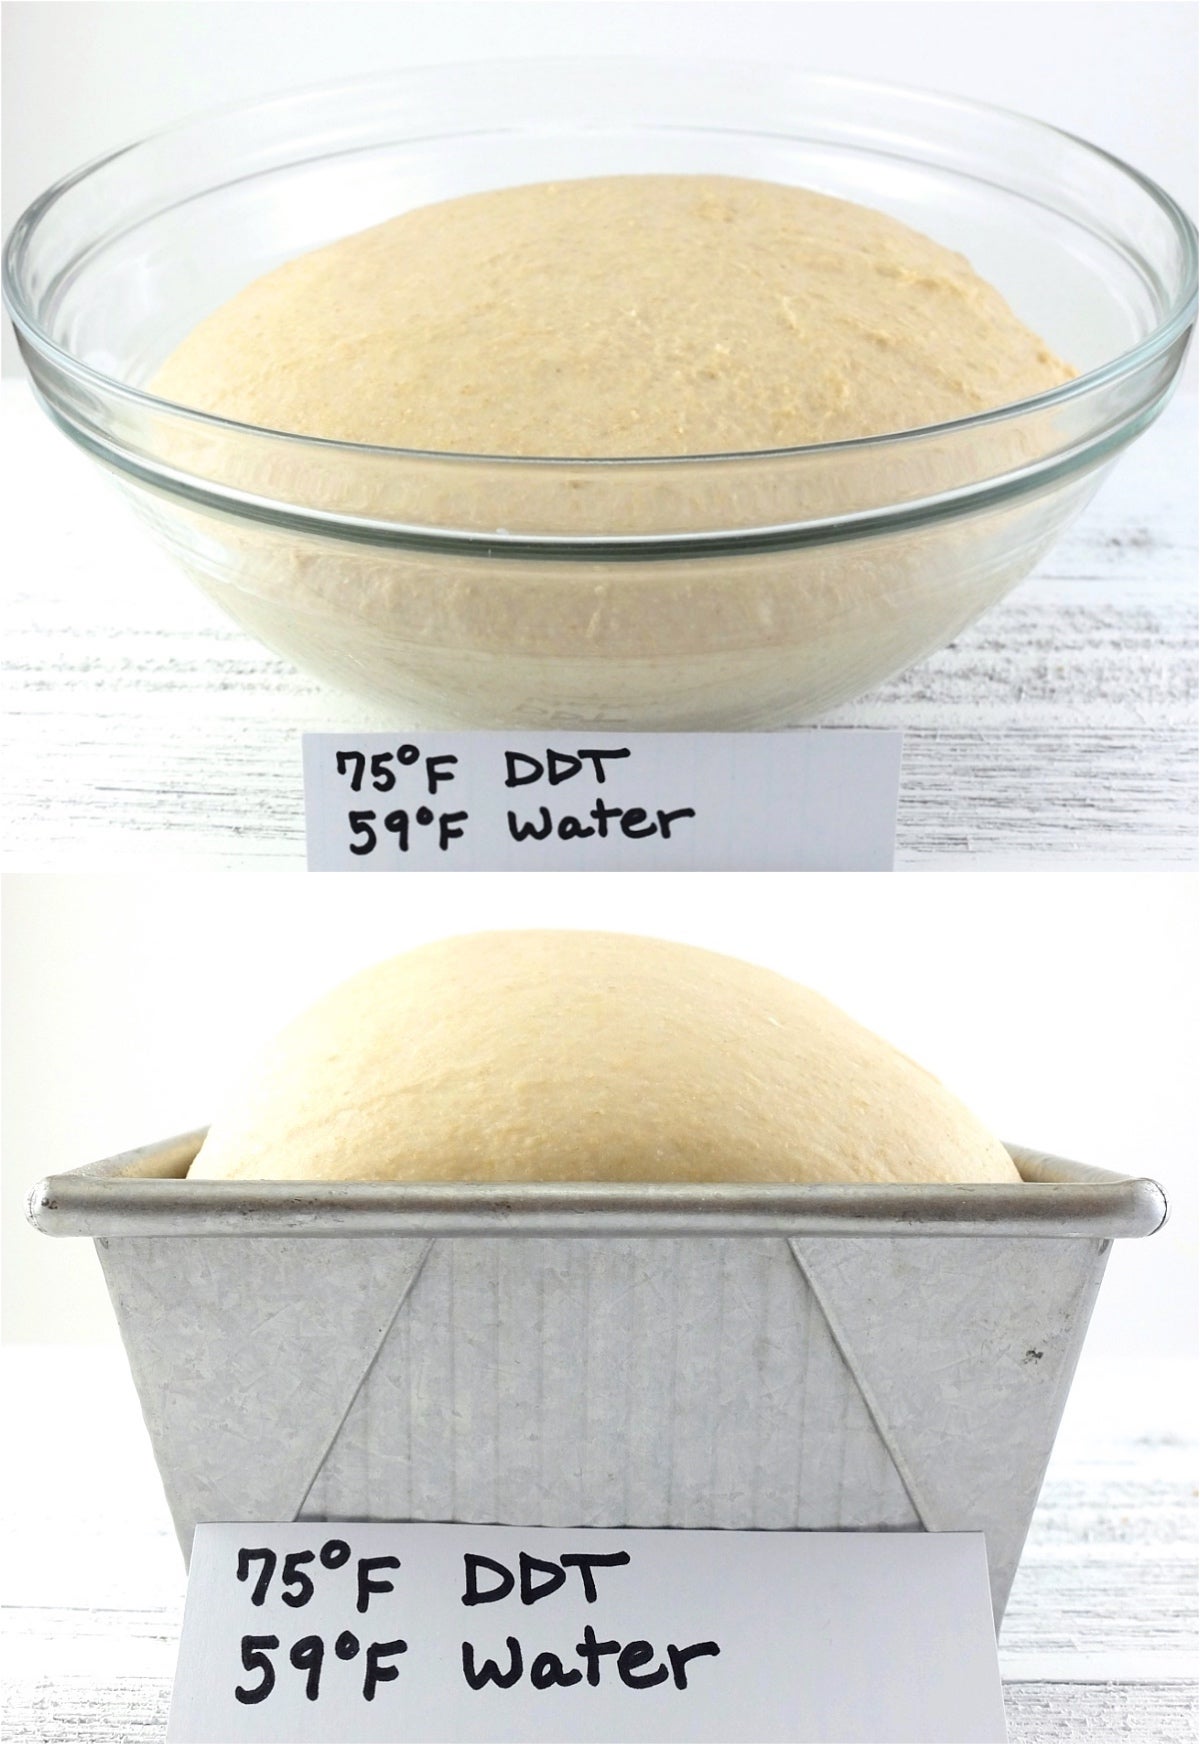 Desired Dough Temperature – How To Calculate And Reach It